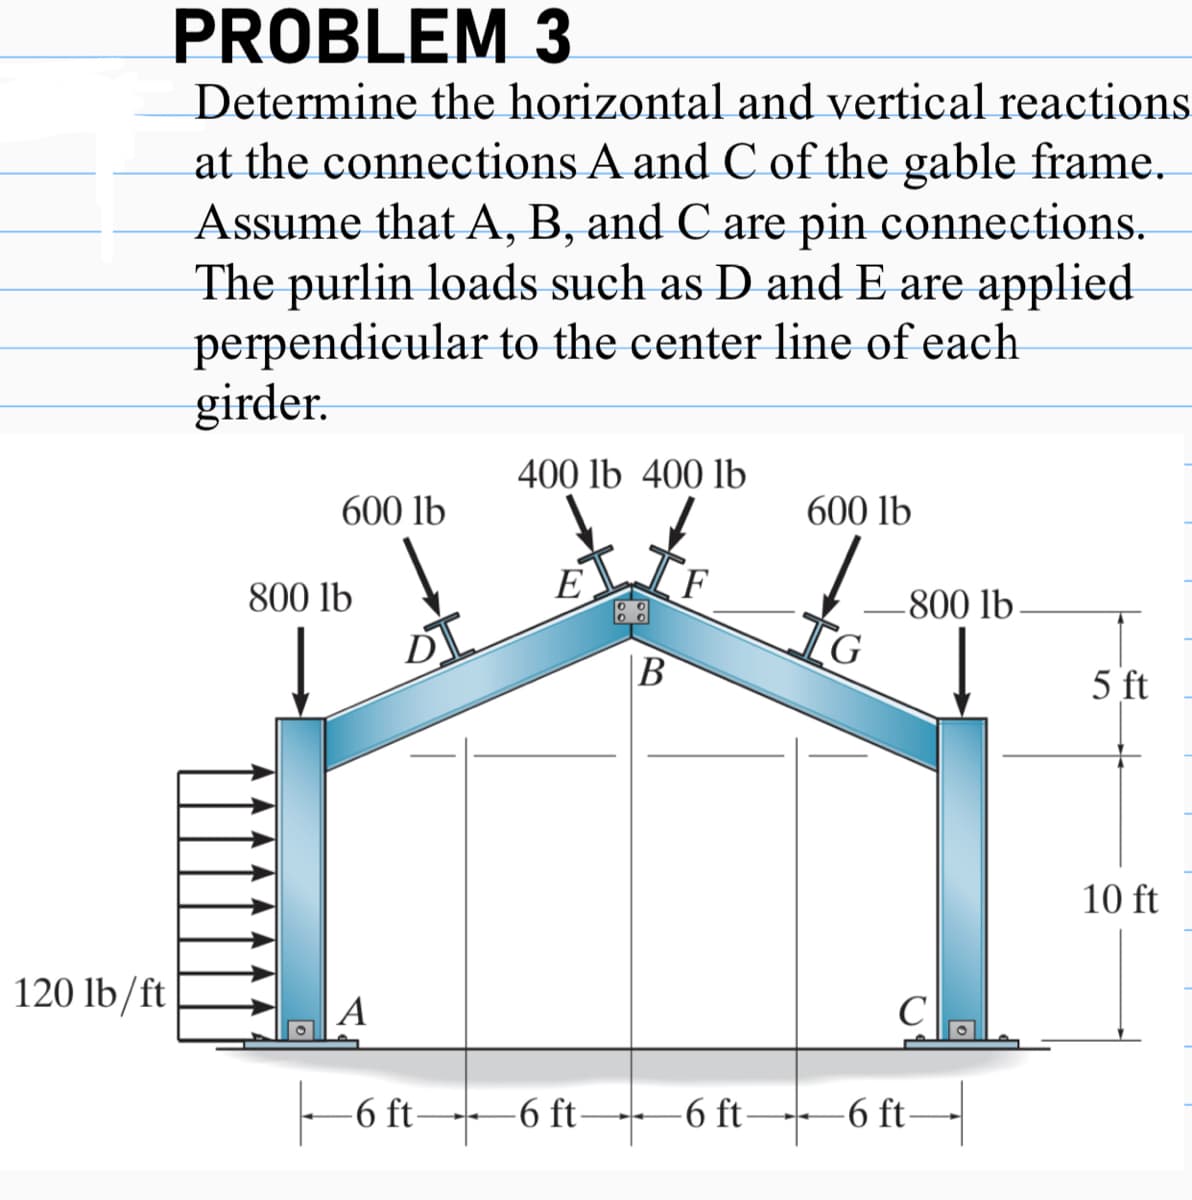 120 lb/ft
PROBLEM 3
Determine the horizontal and vertical reactions
at the connections A and C of the gable frame.
Assume that A, B, and C are pin connections.
The purlin loads such as D and E are applied
perpendicular to the center line of each
girder.
600 lb
800 lb
A
-6 ft-
400 lb 400 lb
Ε.
-6 ft-
B
→→
F
-6 ft-
600 lb
to
-800 lb.
-6 ft-
5 ft
10 ft